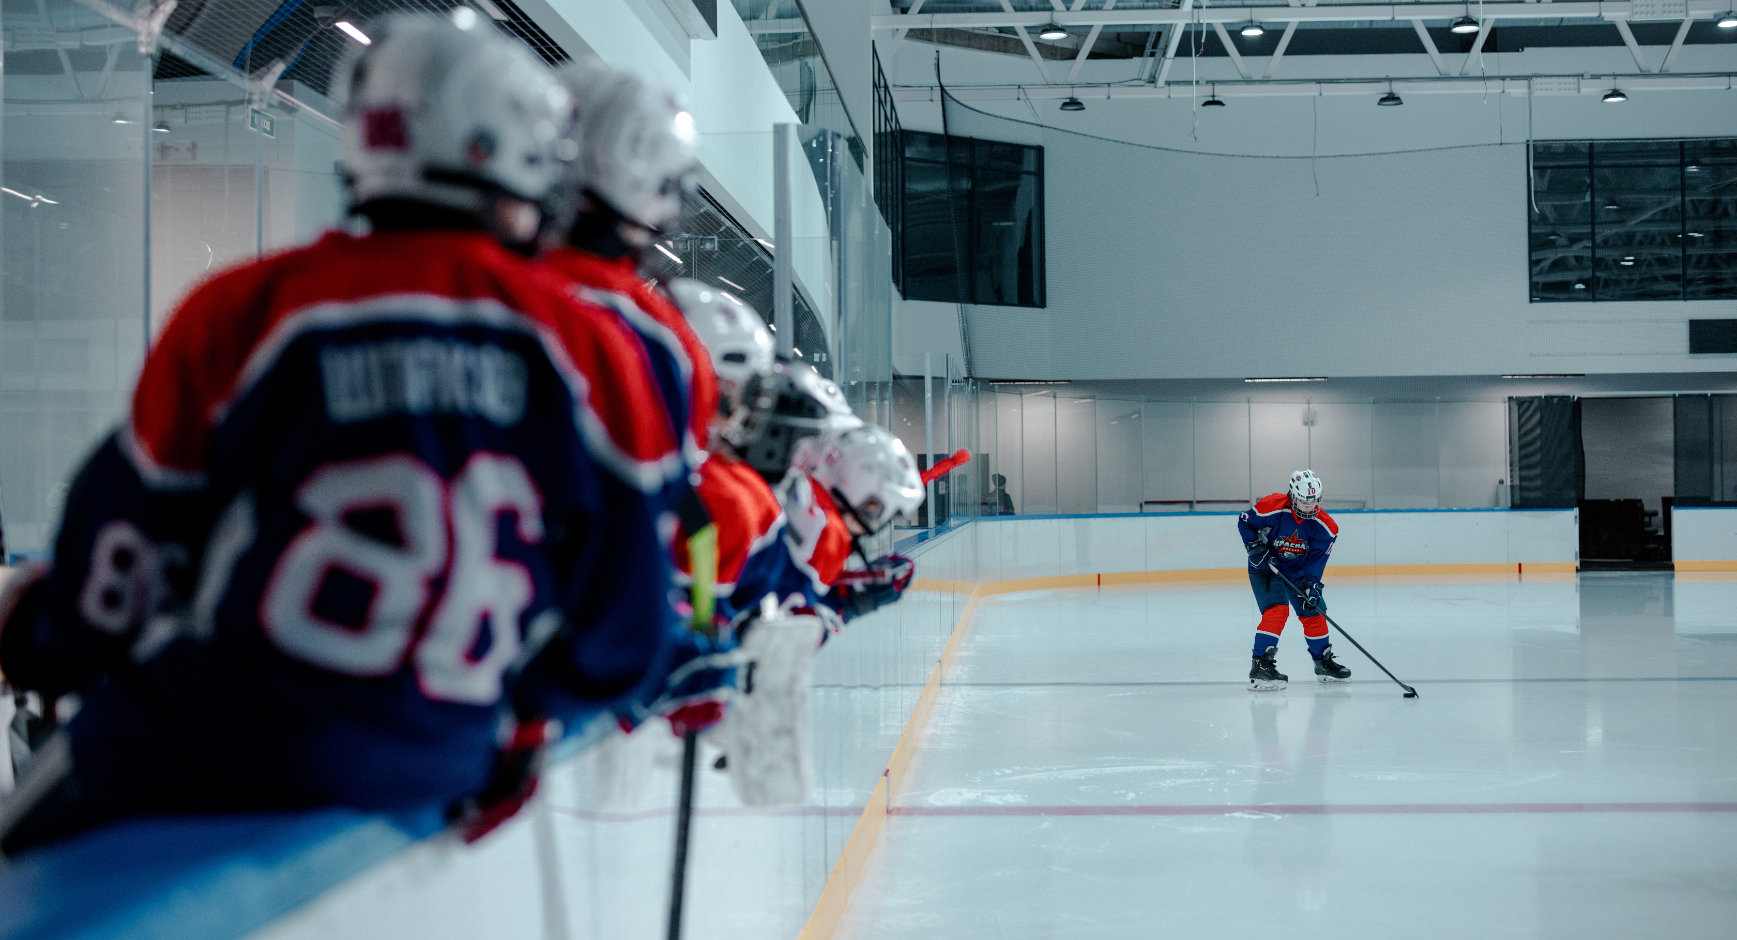 Review exciting, dynamic influential brands at forefront on tech-led evolution in sports Ice Hockey player